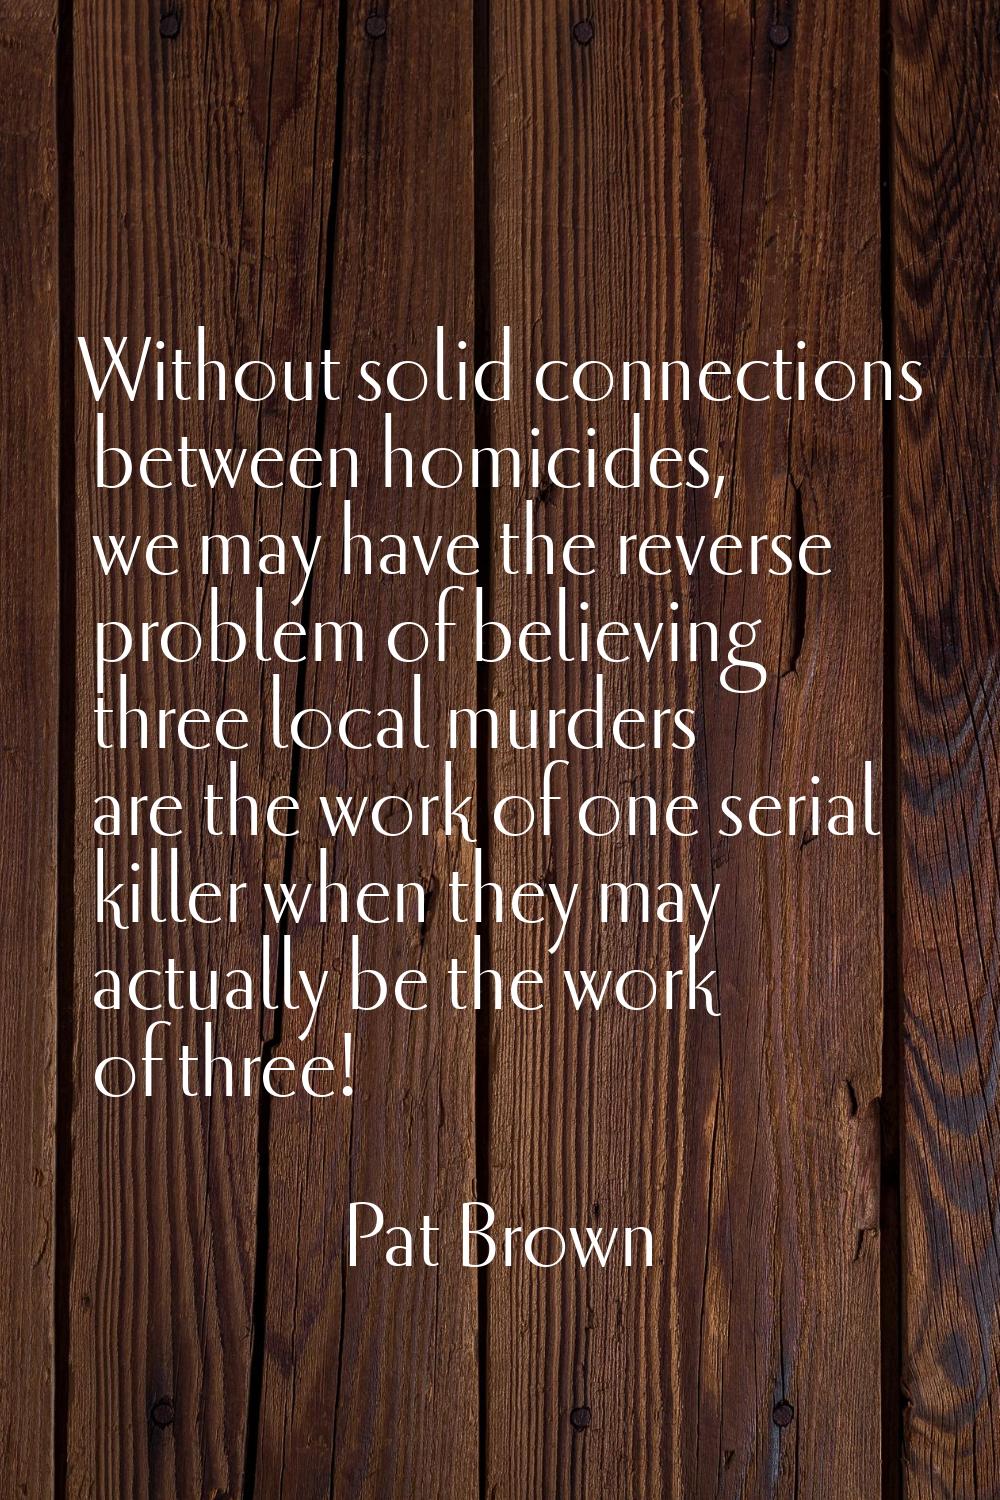 Without solid connections between homicides, we may have the reverse problem of believing three loc